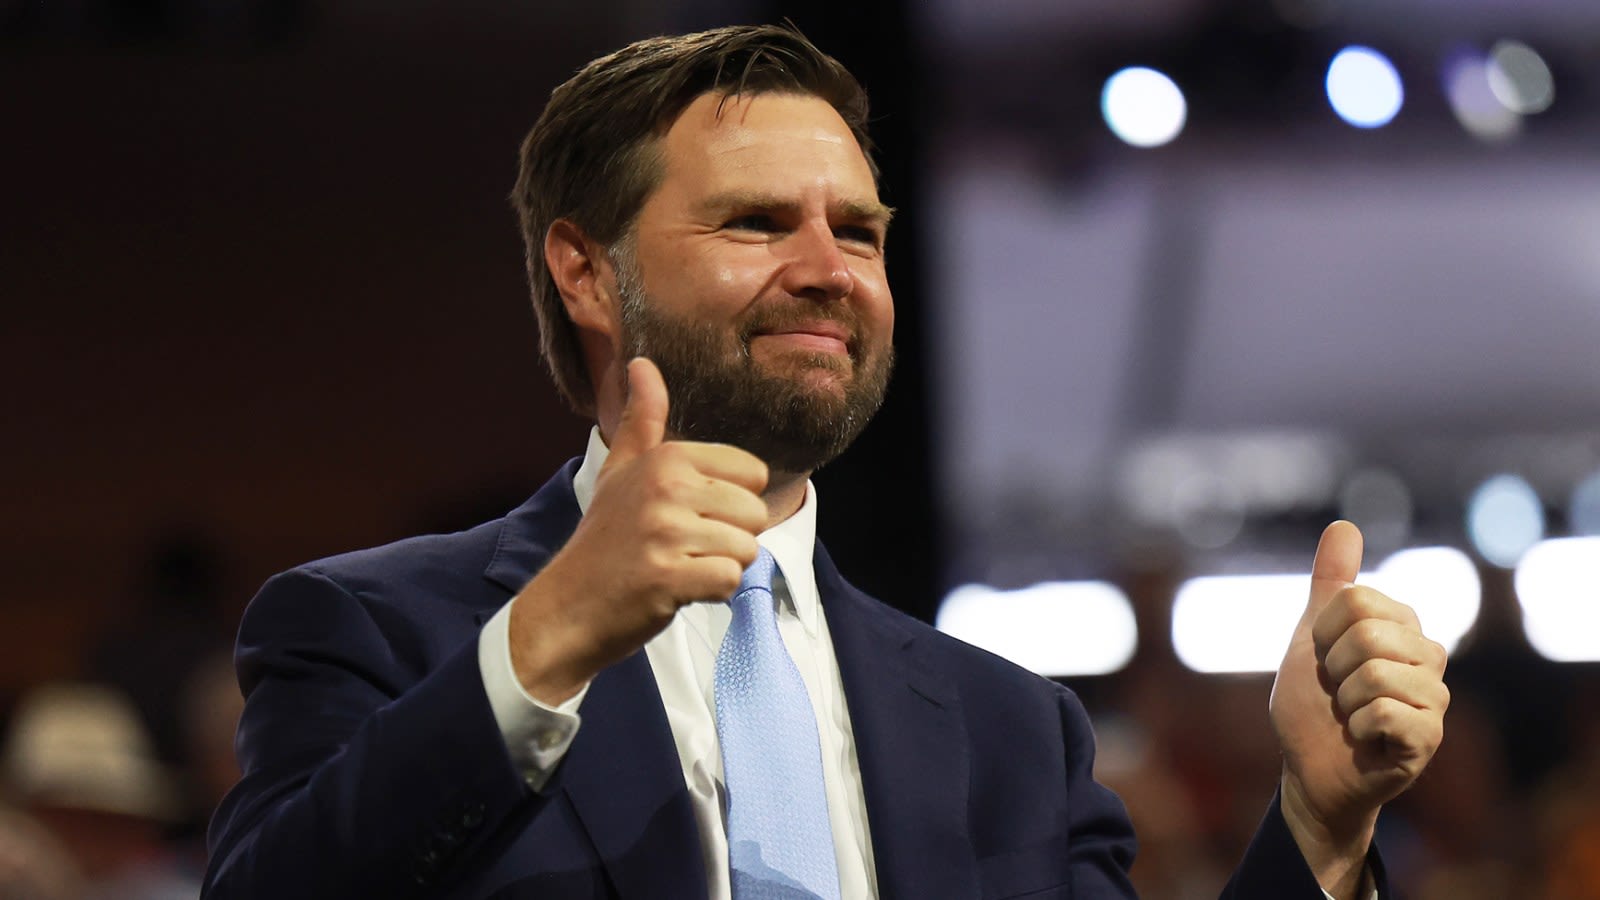 So … What's With This Rumor That J.D. Vance Had Sex With a Couch?